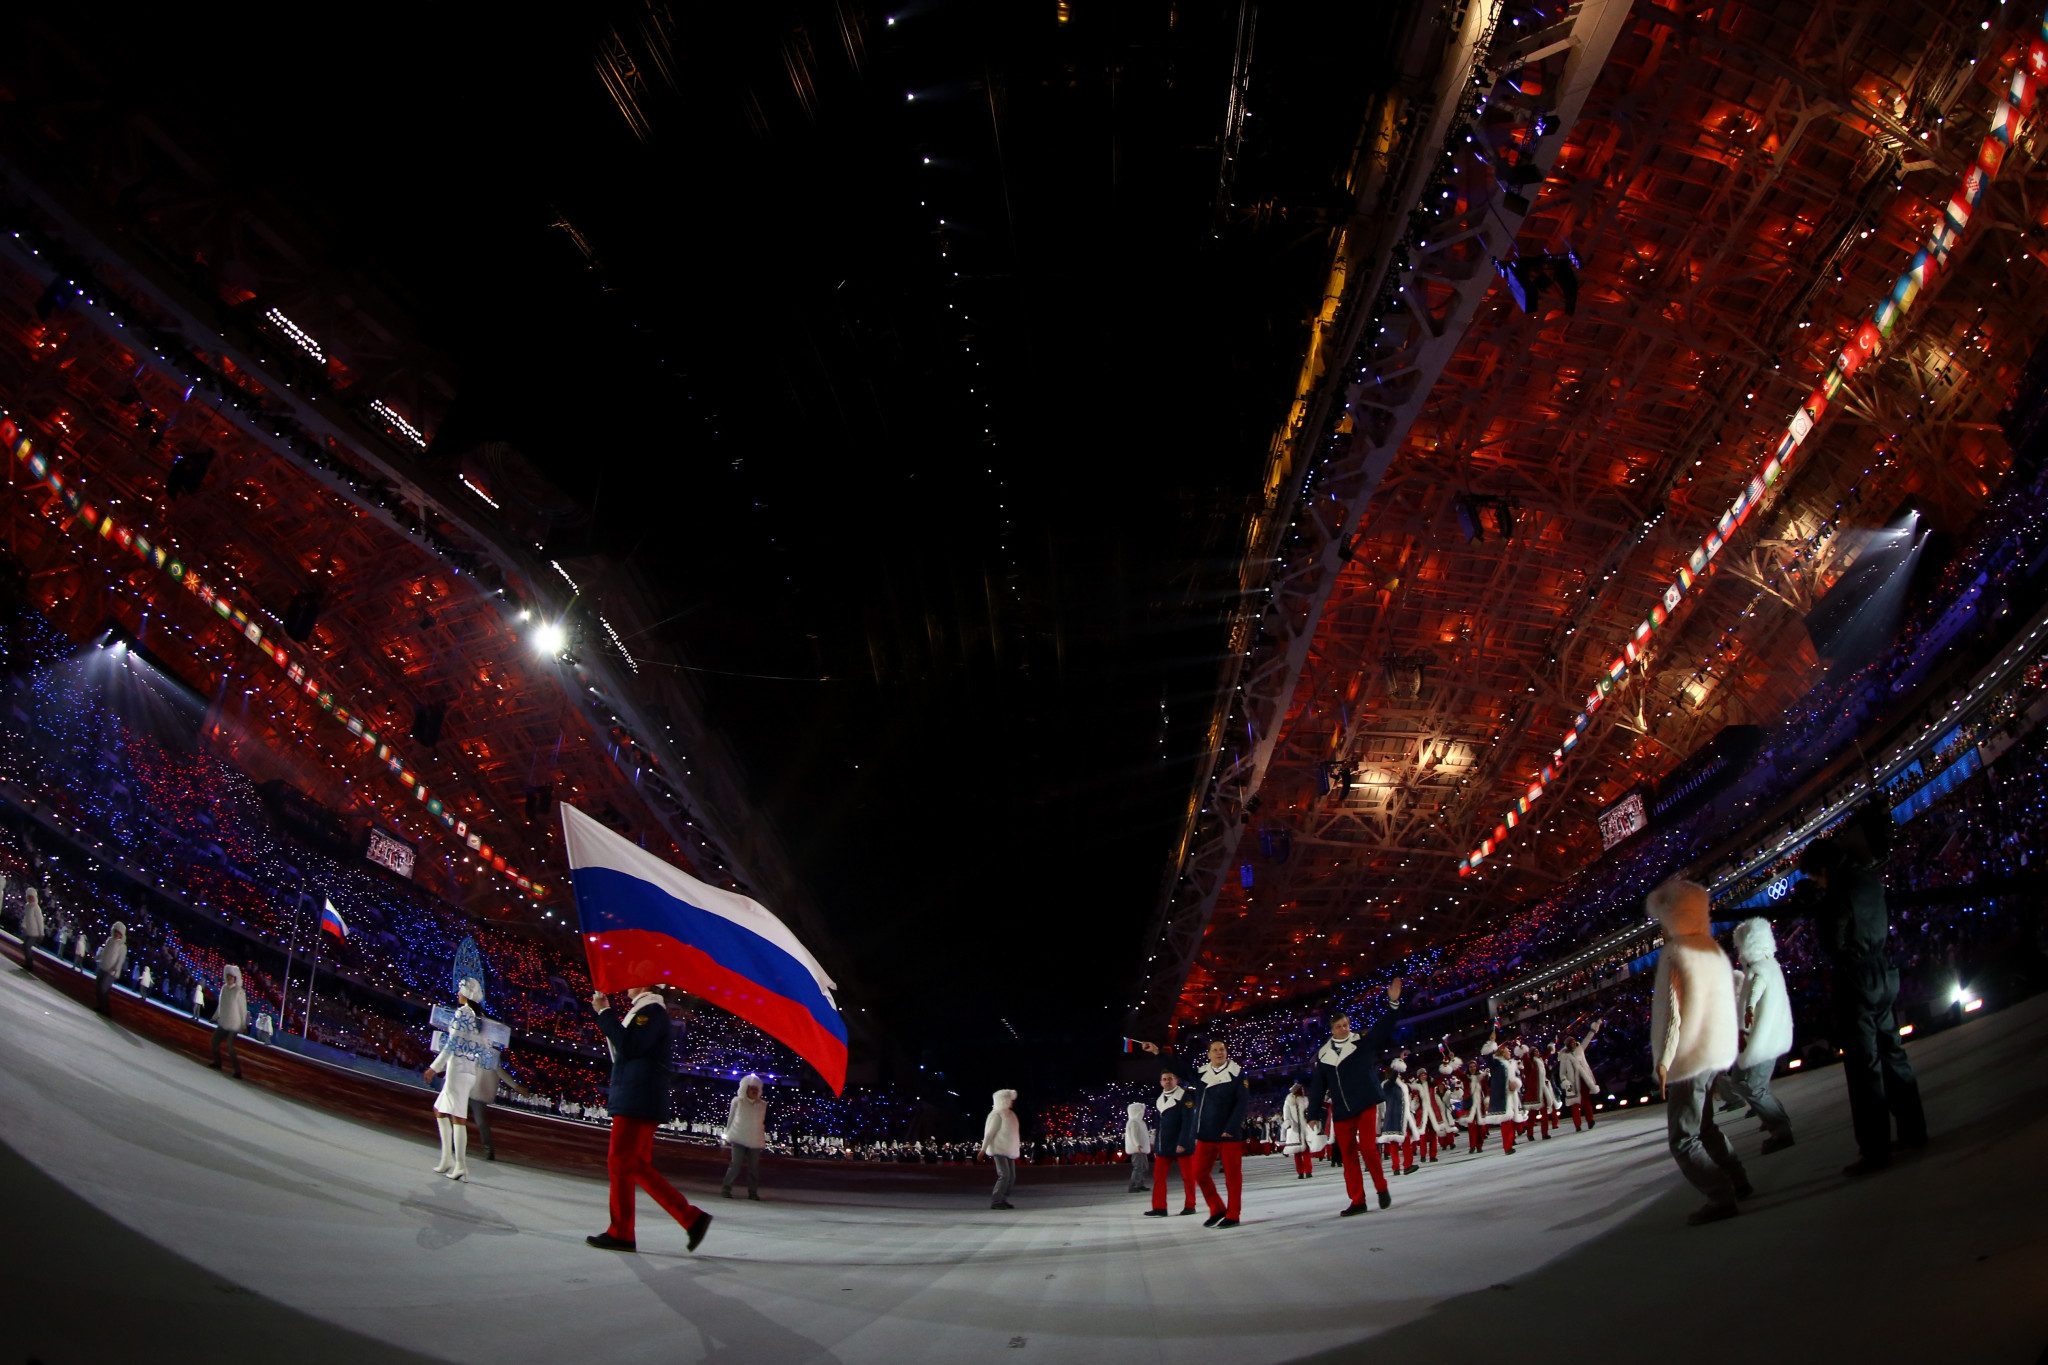 CAS adjourn hearing into 32 Russian athletes hoping to appear at Pyeongchang 2018